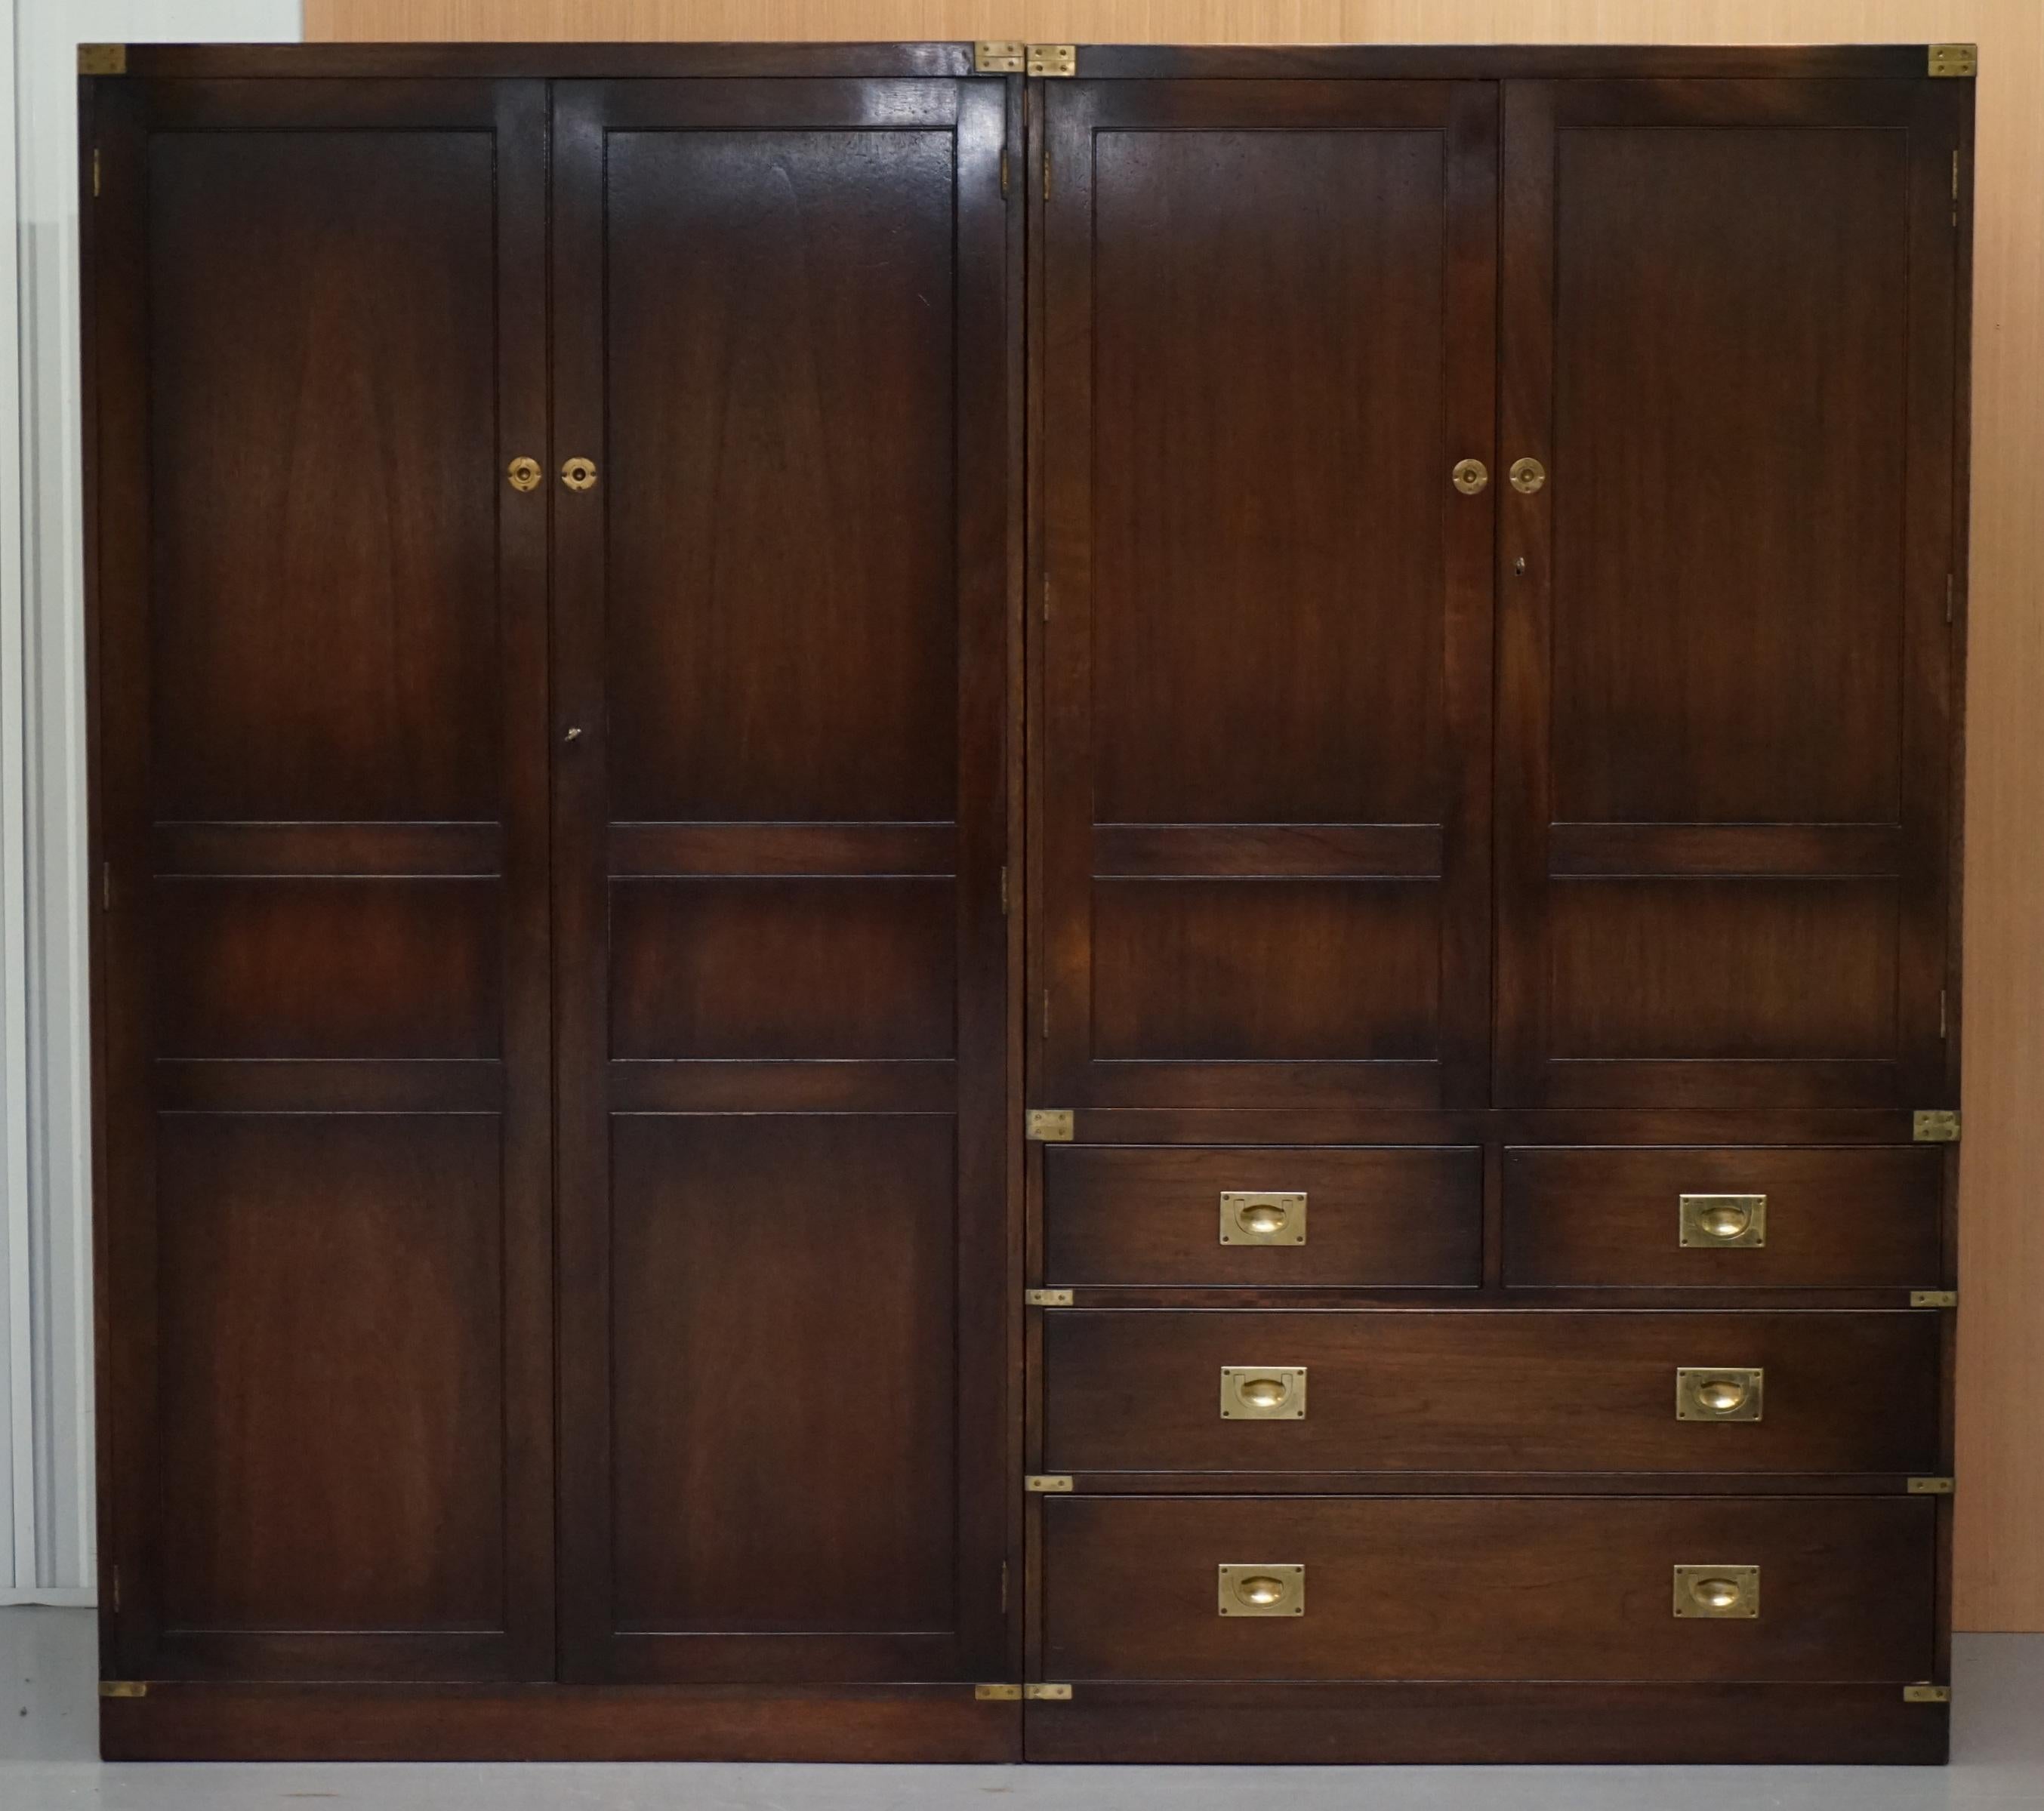 We are delighted to offer for sale one of two stunning Bevan Funell military campaign mahogany wardrobes RRP £7999 each

This auction is for the wardrobe with the drawers, the other piece is not included in this auction but listed under my other